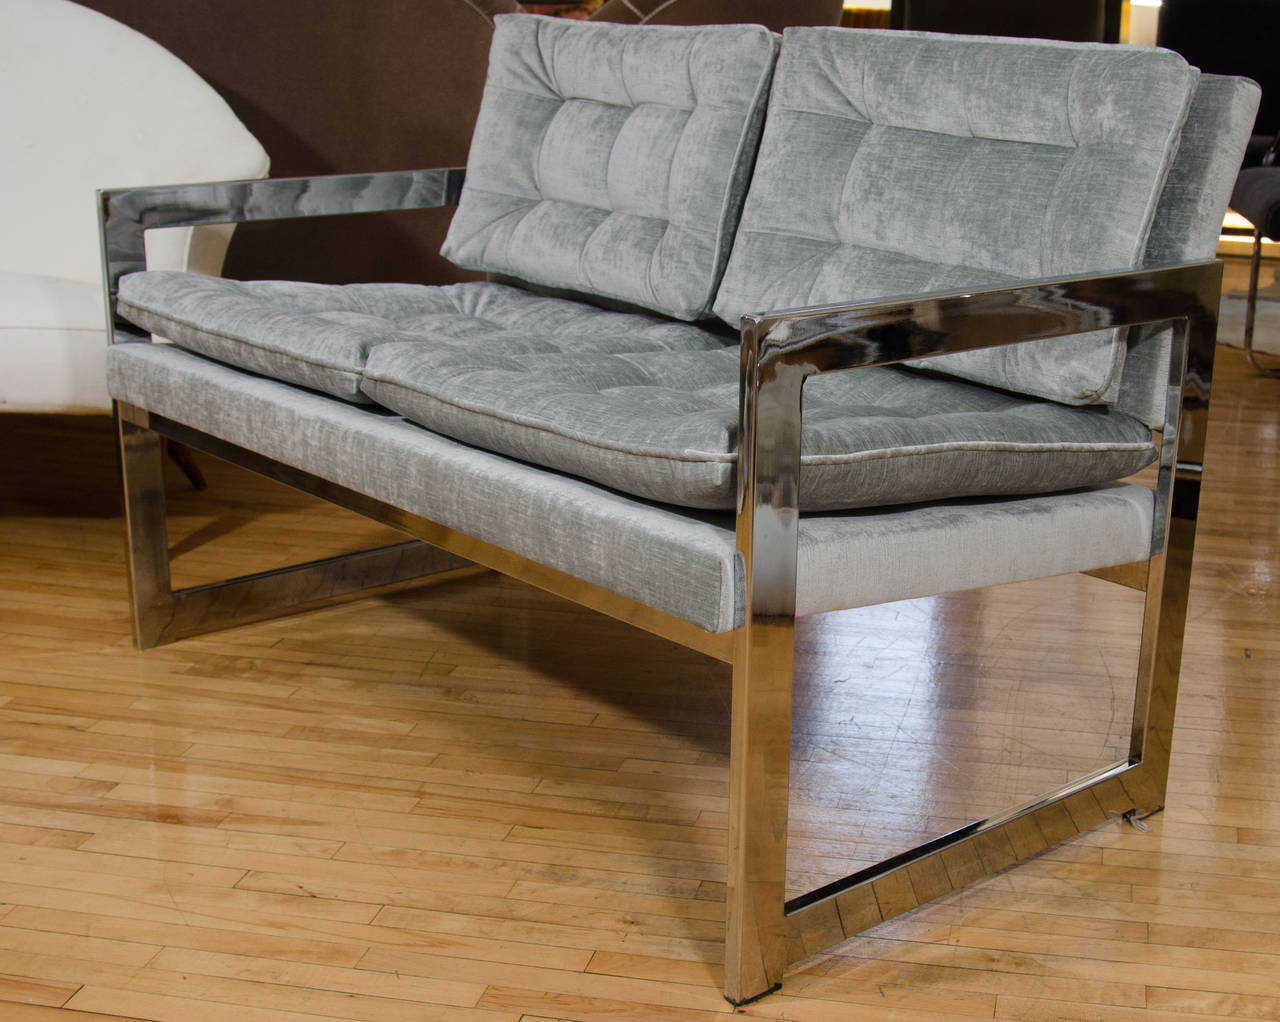 A mid century loveseat, in the style of Milo Baughman, with chrome frame and newly reupholstered in tufted, grey velvet seat and back cushions. Good vintage condition condition with some age appropriate wear.